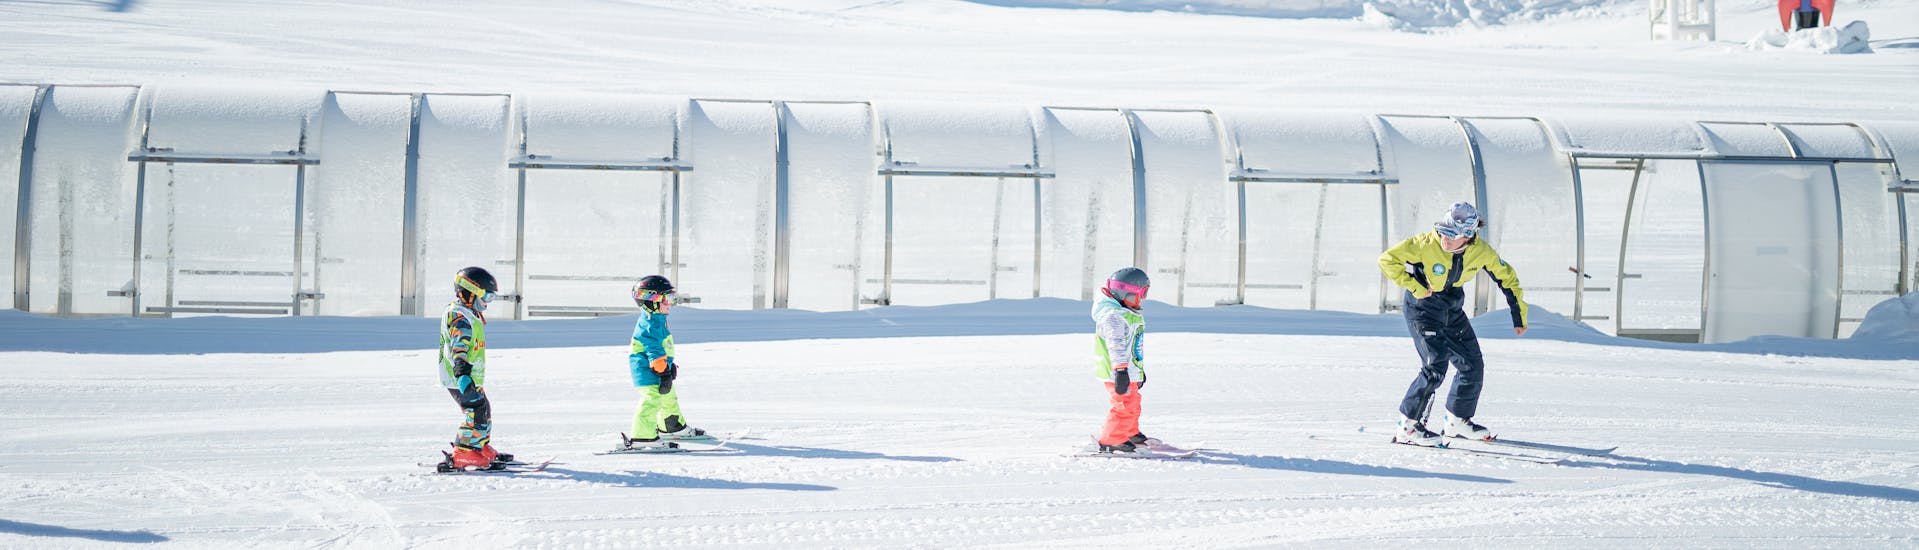 Young children practice snow ploughing during private ski lessons for kids with Prosneige Alpe d'Huez.